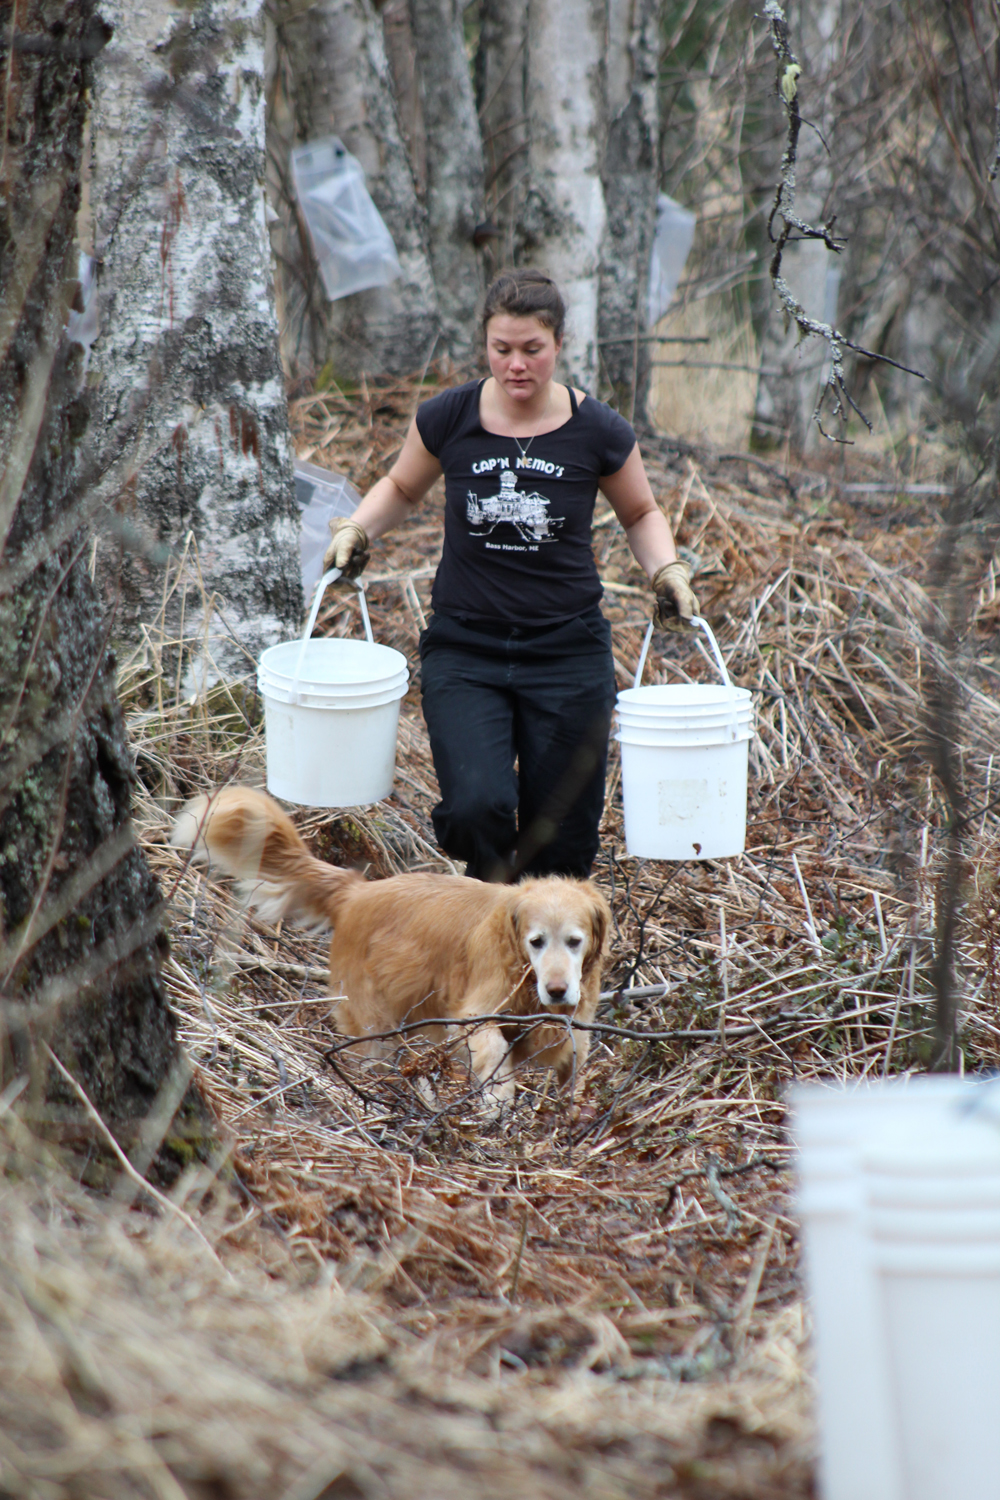 Anna Meredith’s golden retriever Ripley accompanies Chantrelle Cousins as she totes buckets of sap through the woods. Cousins is a friend of Meredith and Jake Beaudoin who helps collect sap from area birch trees to turn into syrup.-Photo by Anna Frost, Homer News